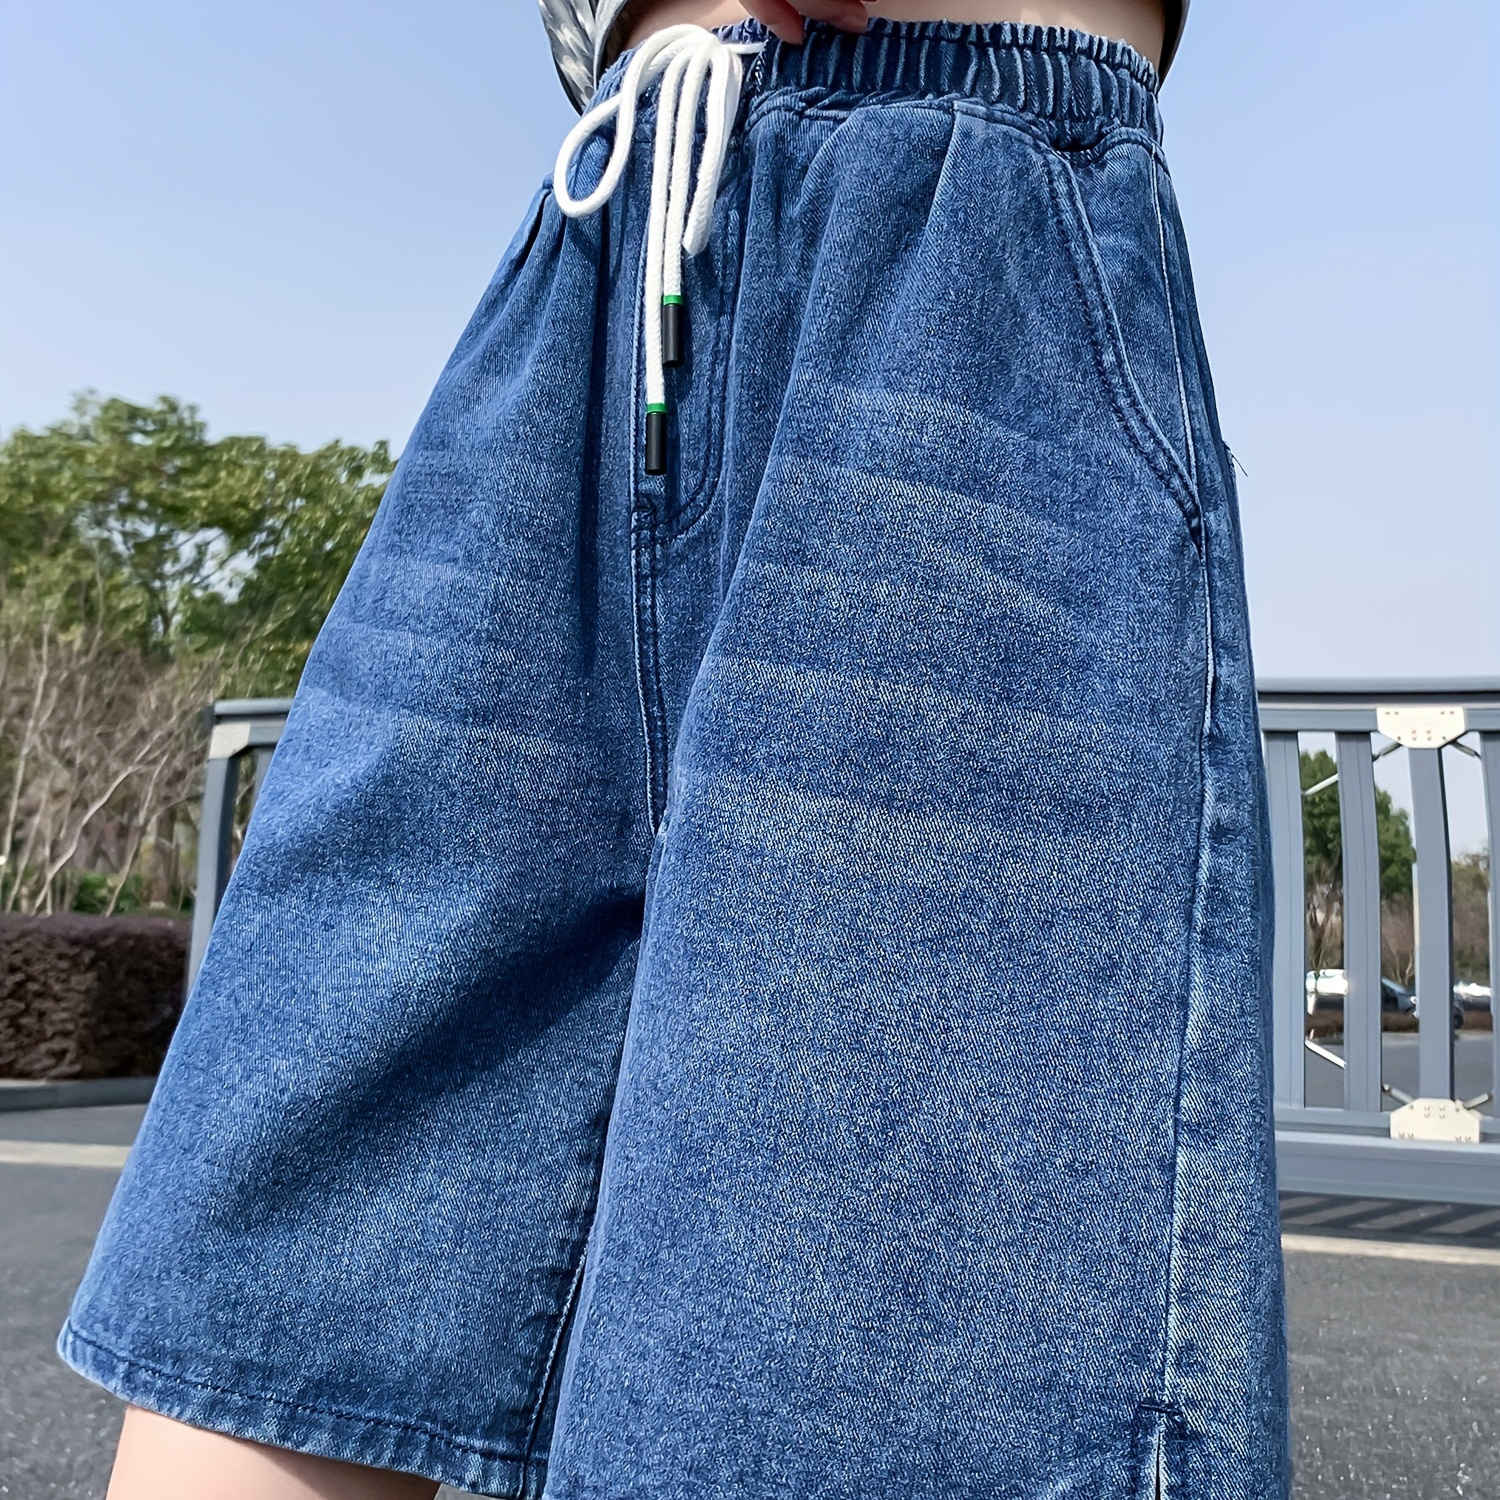 

Women's Plus Size High Waisted A-line Denim Shorts For Summer With Pockets, Elastic Waist Drawstring Wide Leg Loose Jean Shorts For Women, Casual Blue Color Comfy Denim Bottoms, Women's Clothing